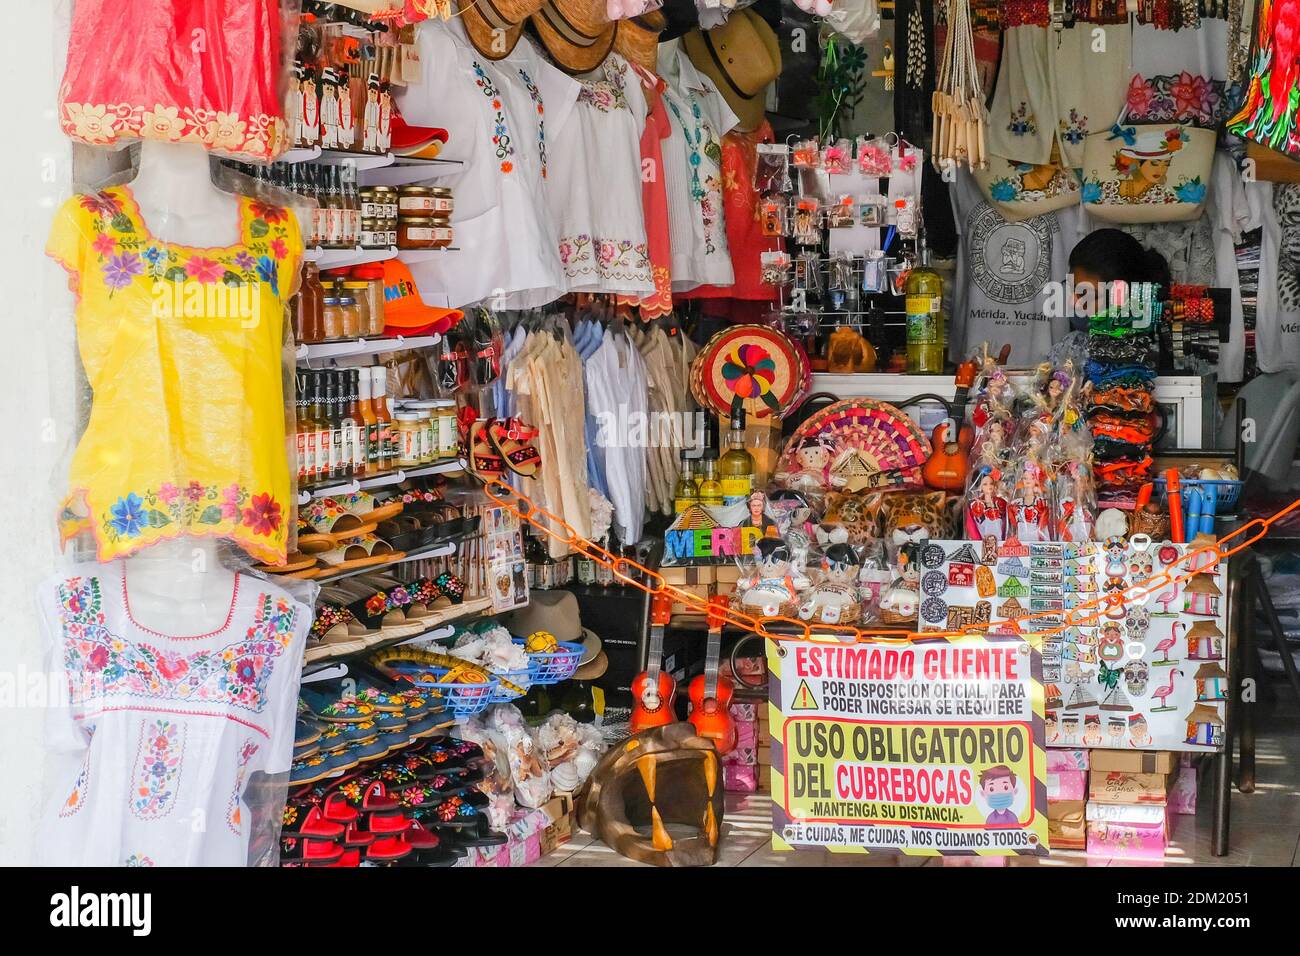 Tourist shop with Covid-19 Sanitary Preventions in place, Centro of Merida Mexico Stock Photo